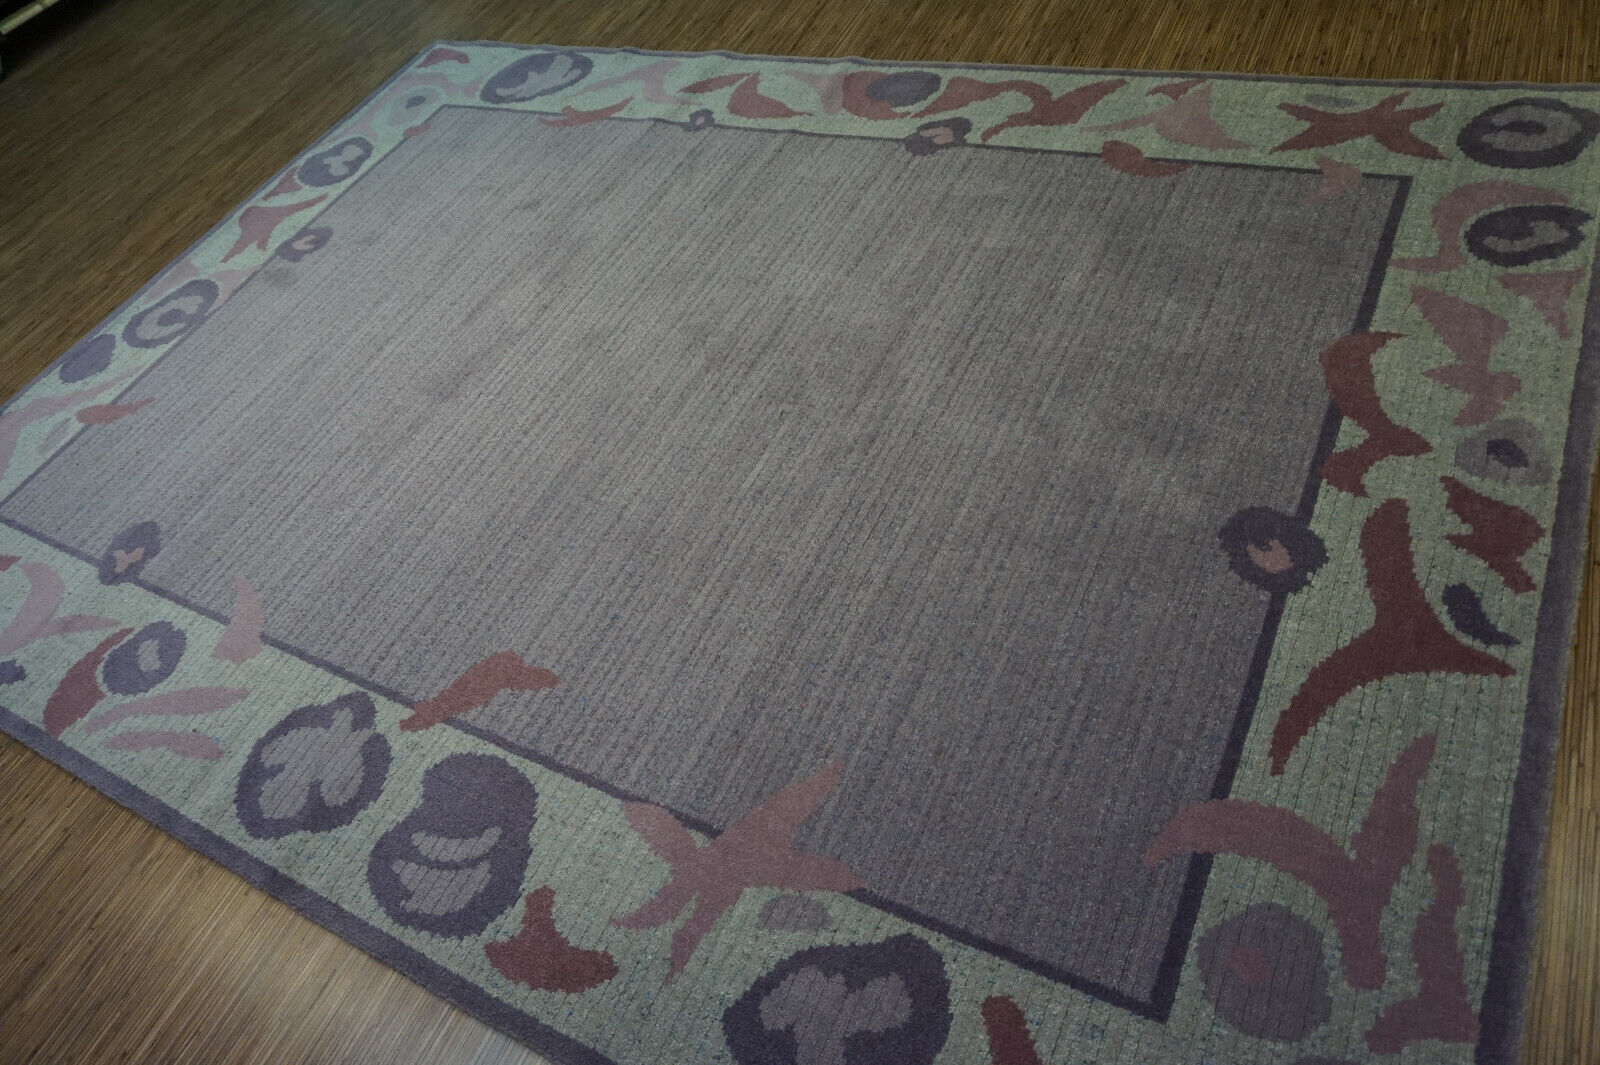 Vibrant purple hues in the main section of the Vintage B&C Rug